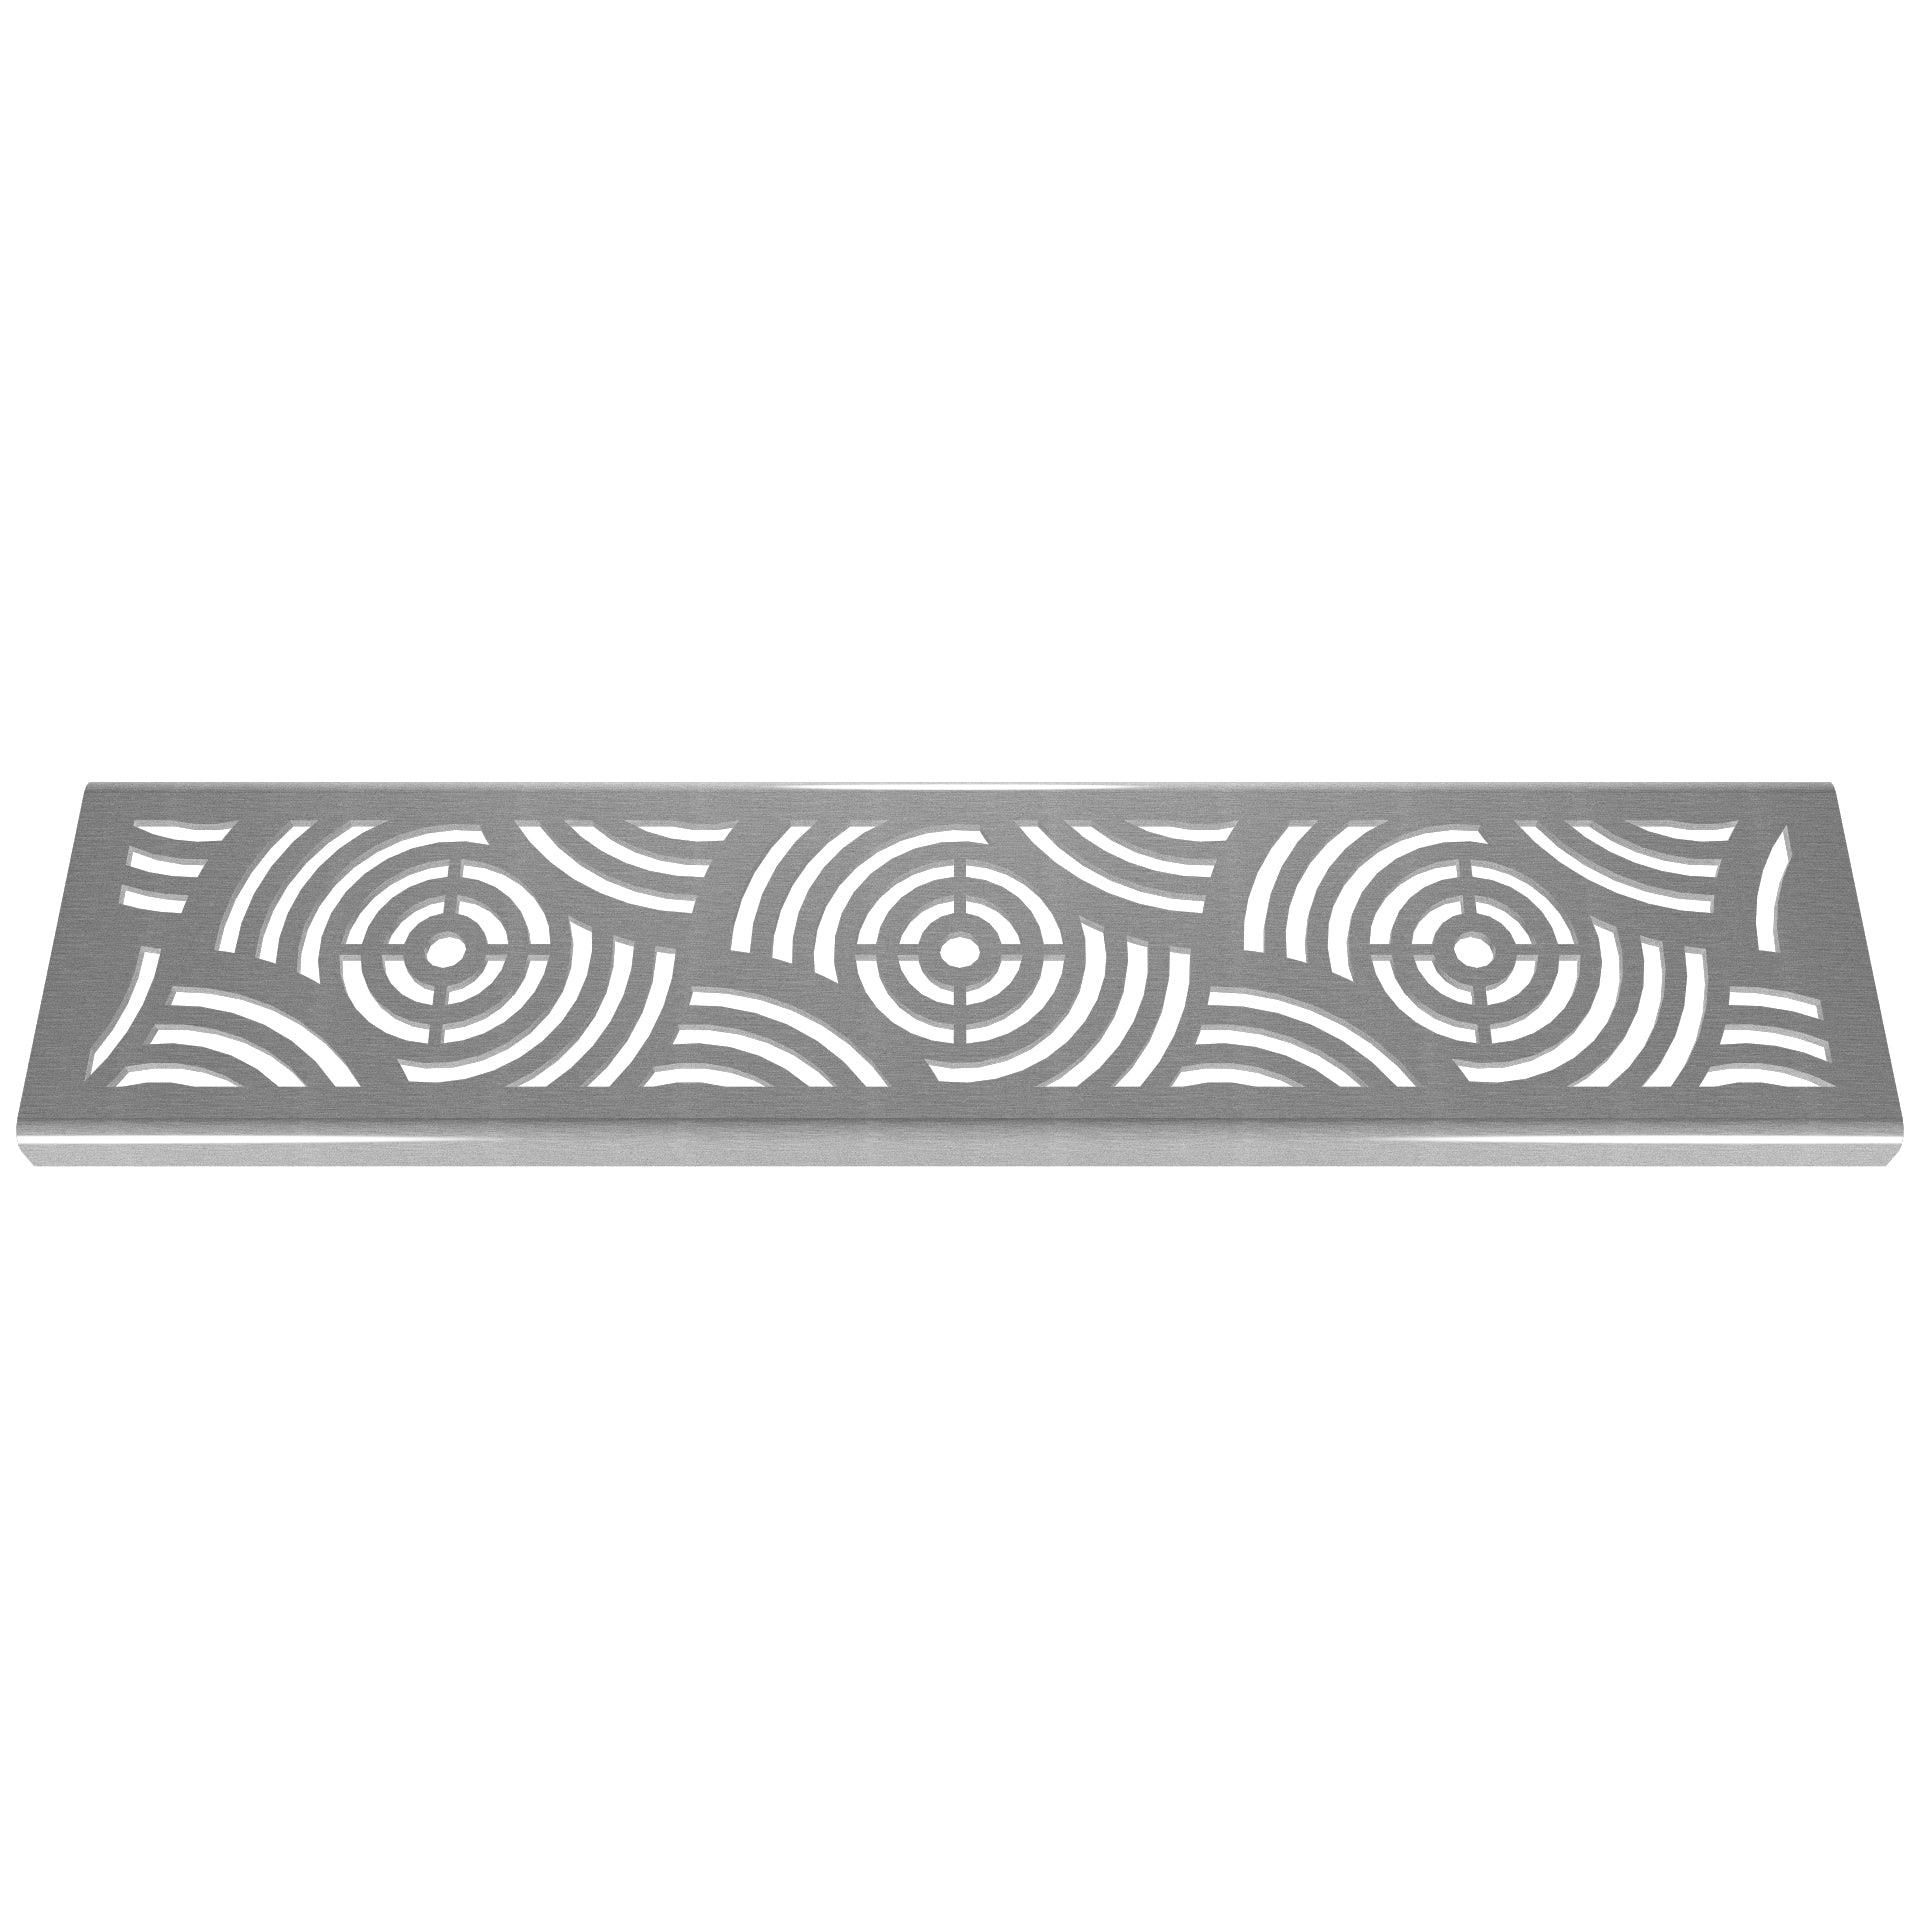 Waves 304 Stainless Steel Channel Drain Grate 75 x 913mm (3 Inch)